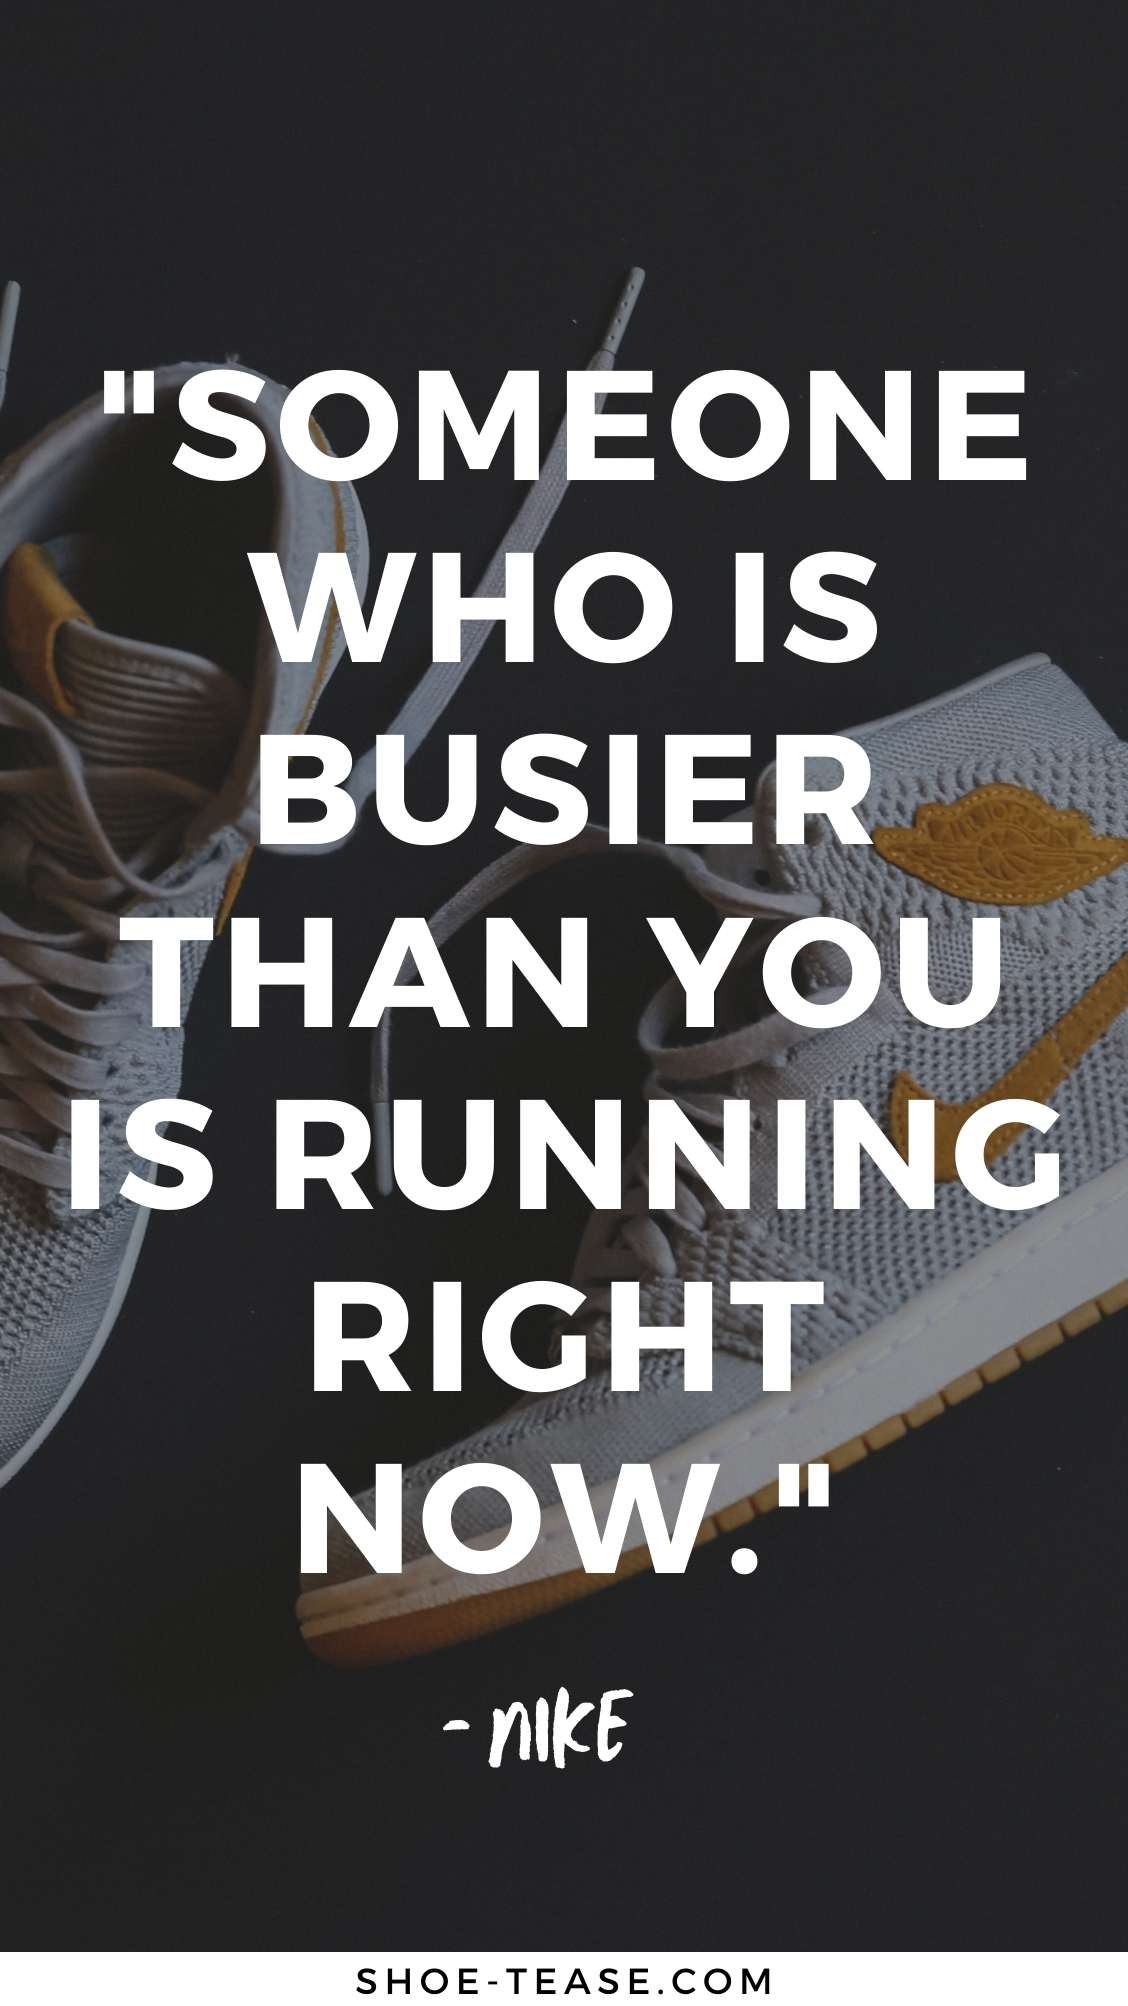 Nike Quote reading Someone who is busier than you is running right now over a pair of yellow and white Nike jordans sneakers.